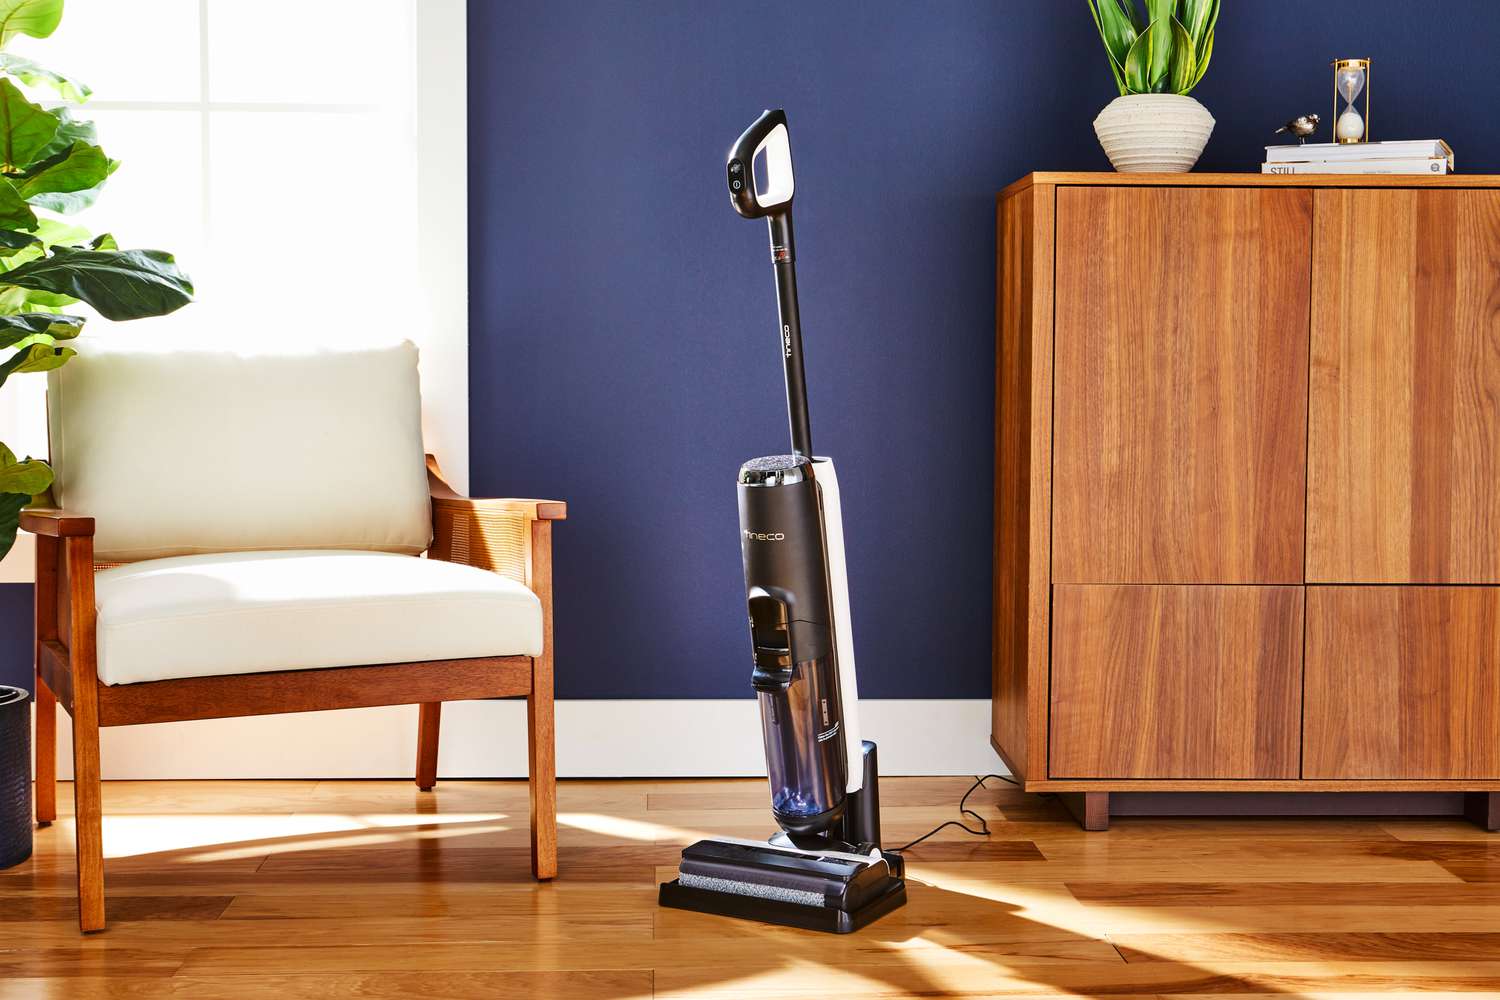 Tineco Floor One S5 Cordless Wet/Dry Vacuum Cleaner on a wooden floor next to furniture